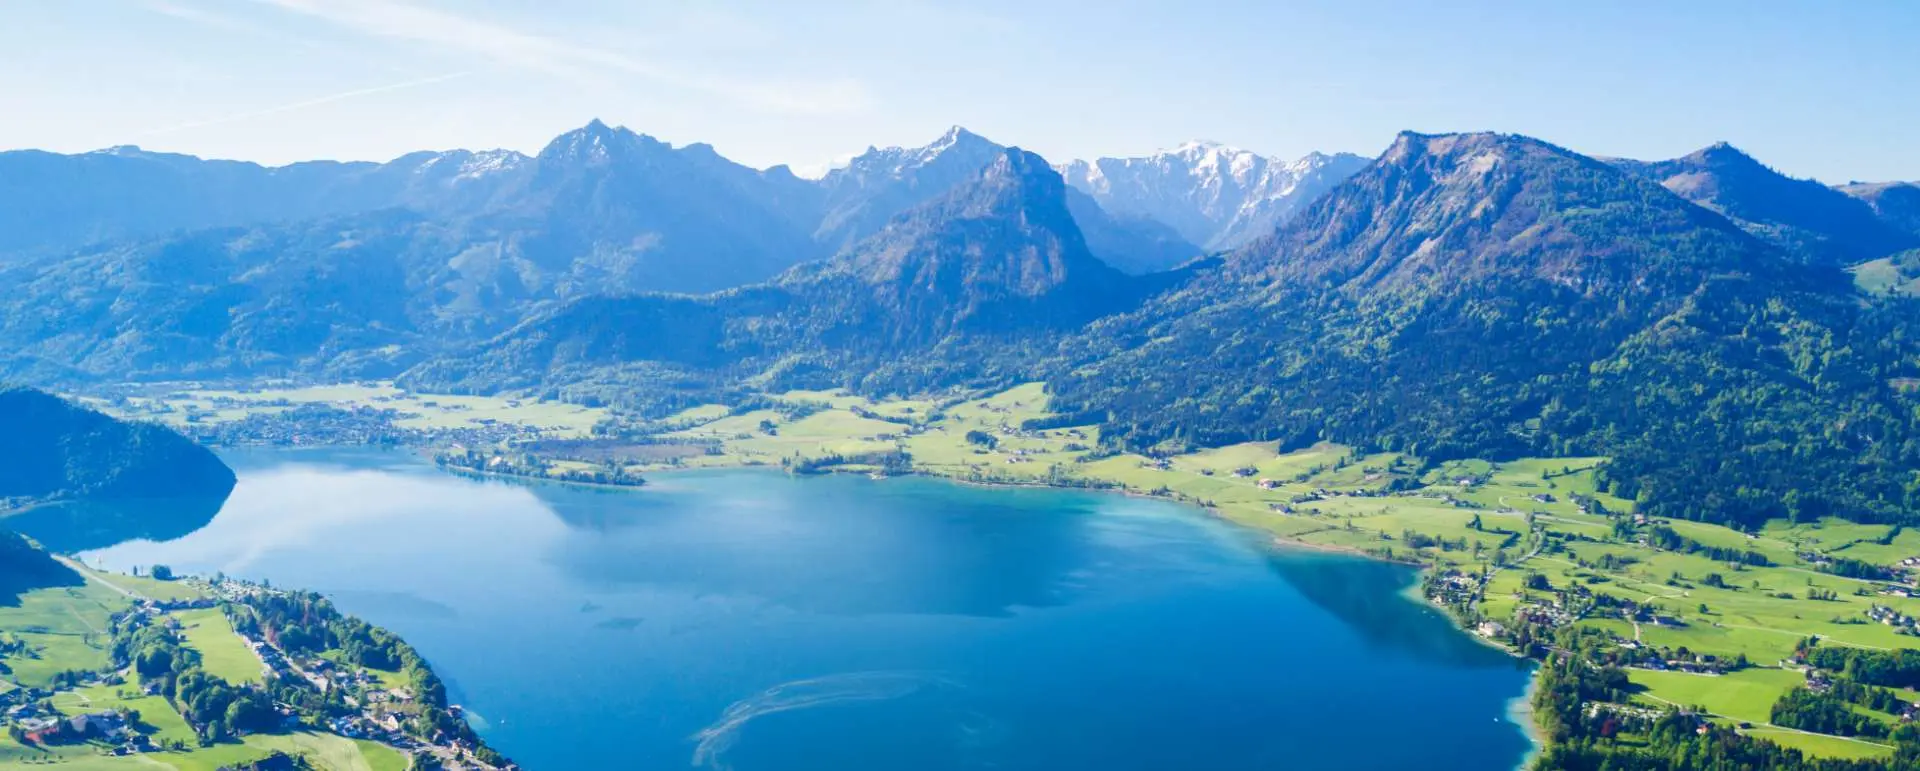 Wolfgangsee Lake - affordable student hotels for educational trips